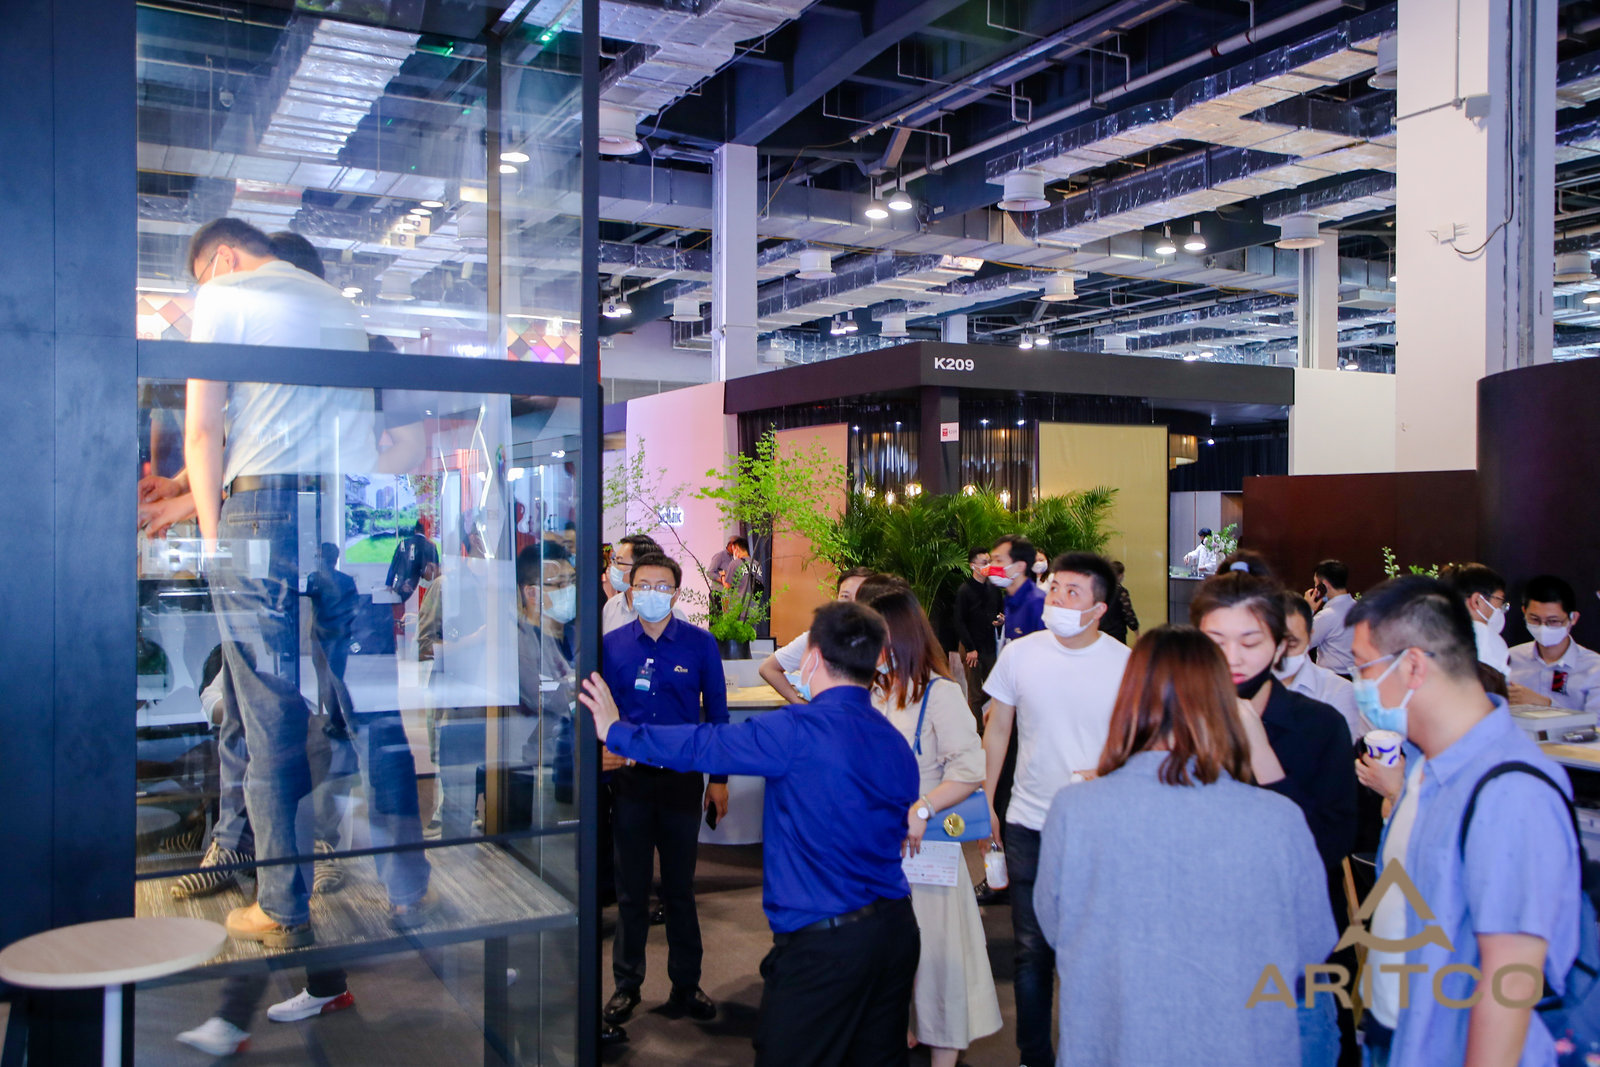 Visitors in the Aritco home lift counter at the Design Shanghai 2021